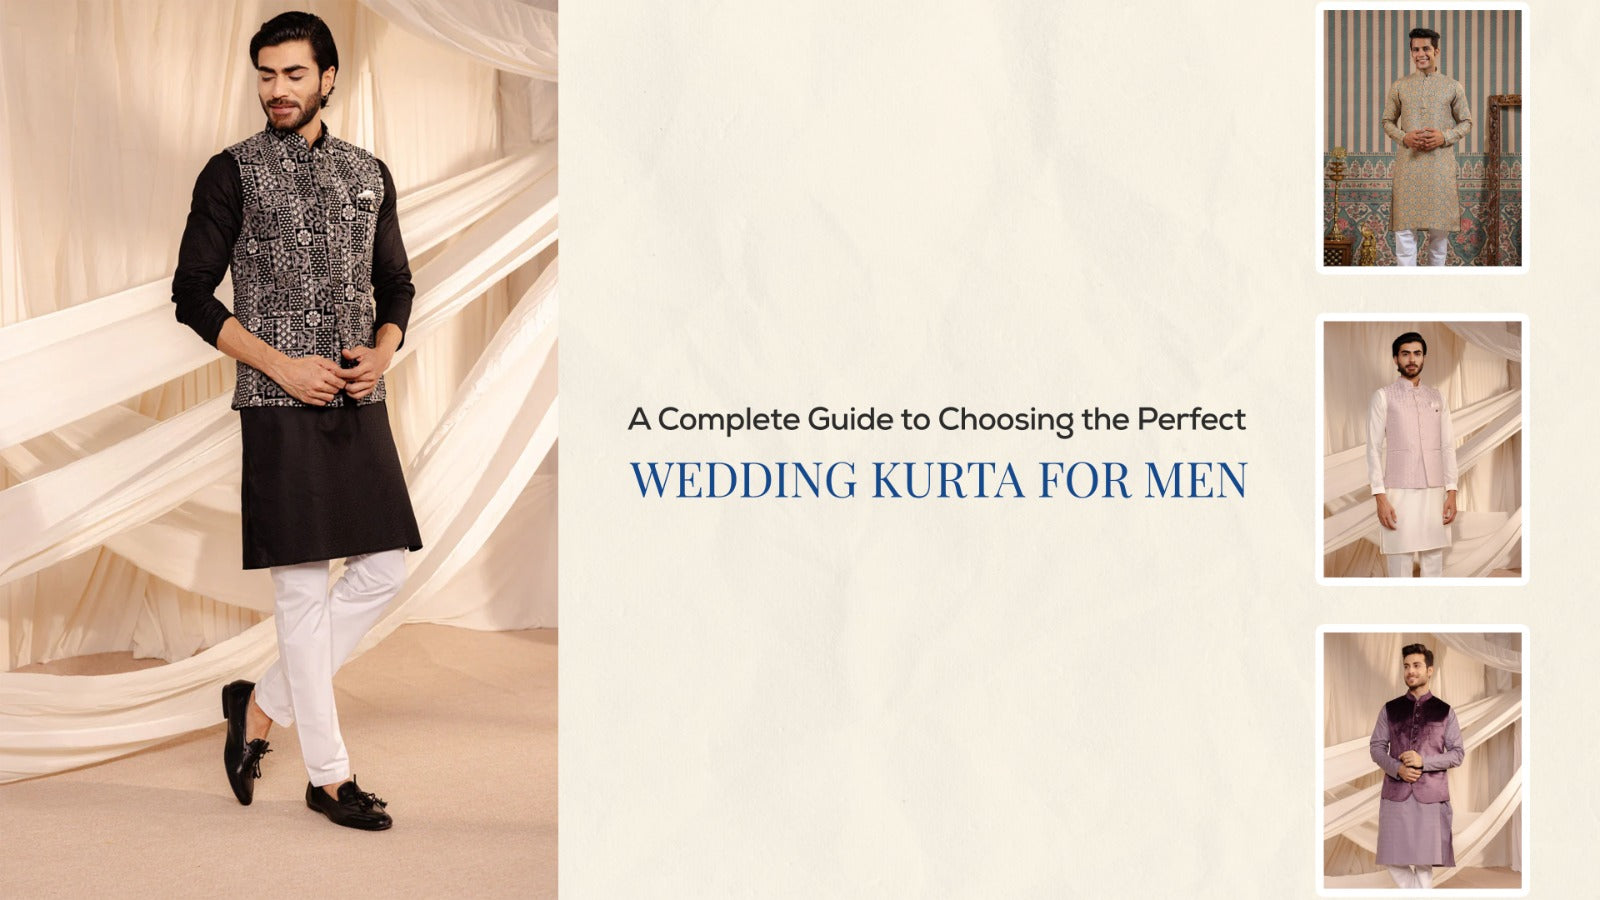 A Complete Guide to Choosing the Perfect Wedding Kurta for Men